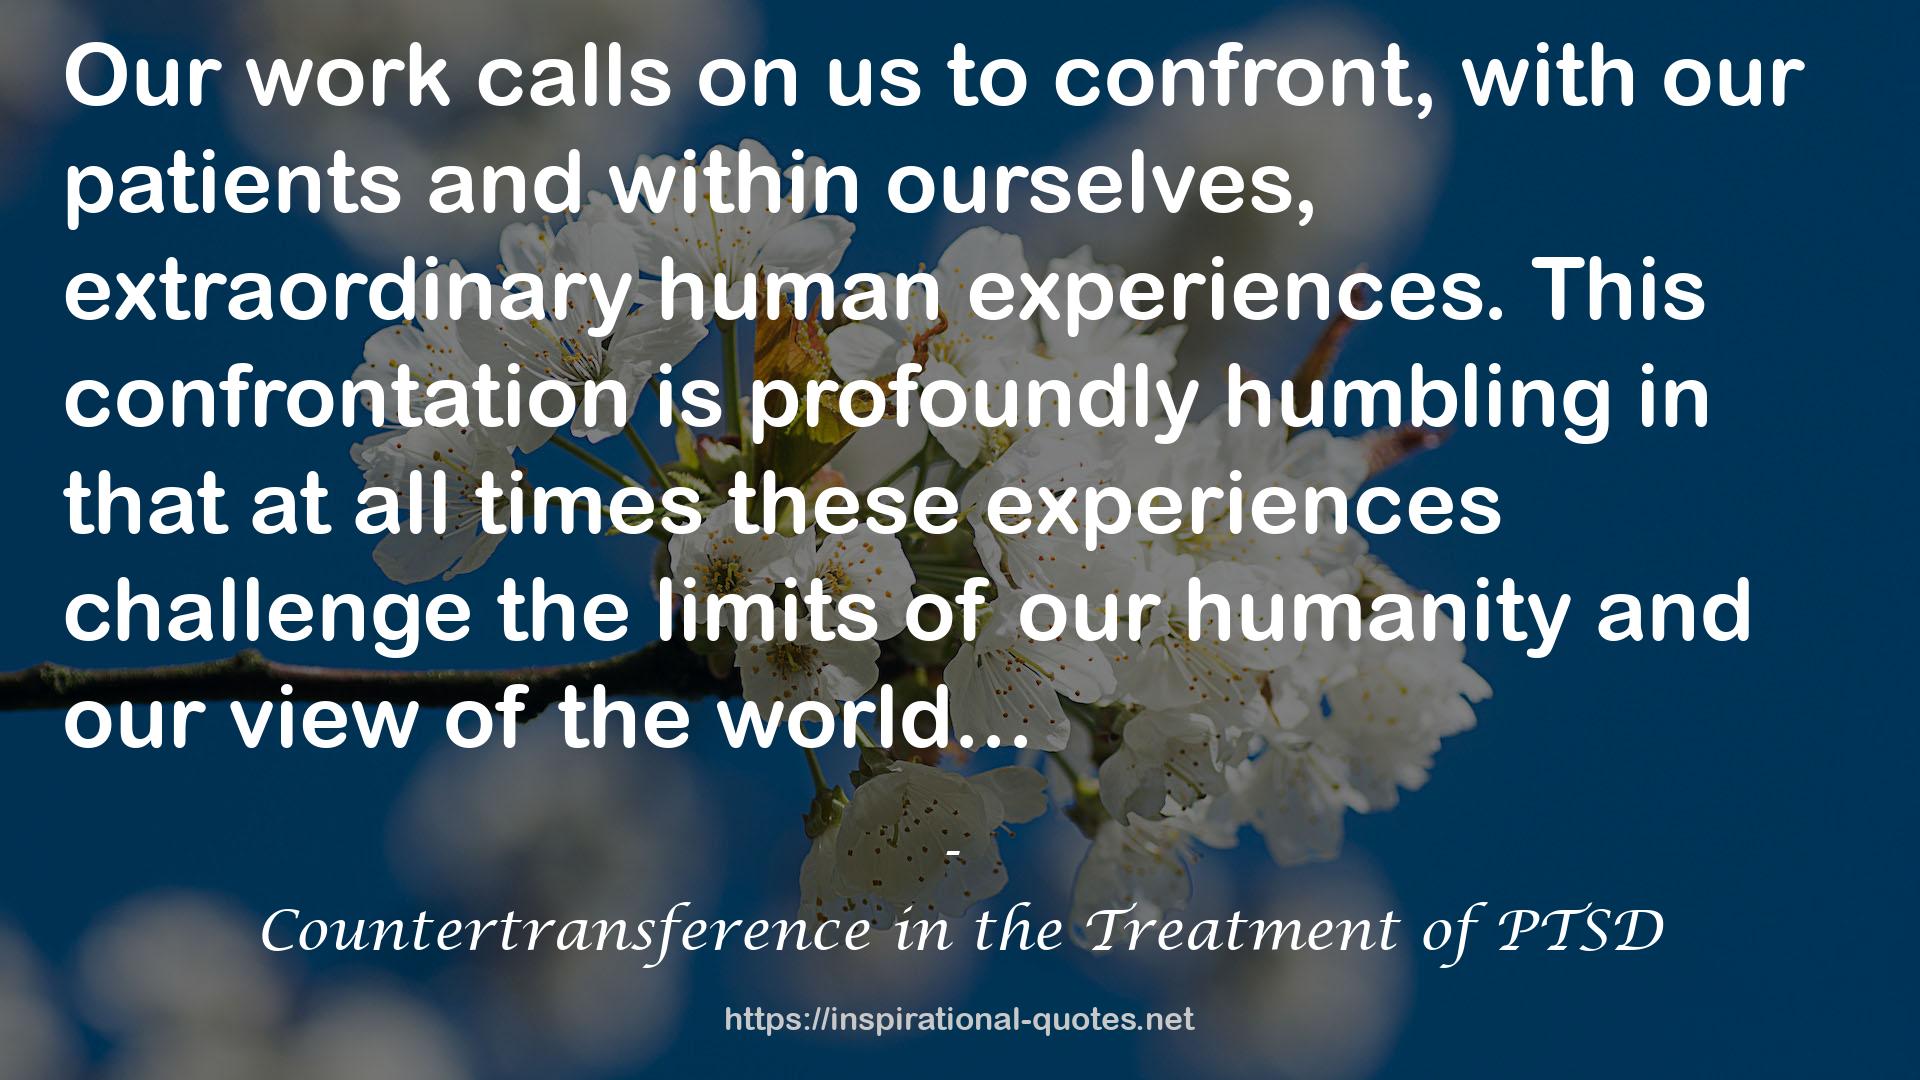 Countertransference in the Treatment of PTSD QUOTES